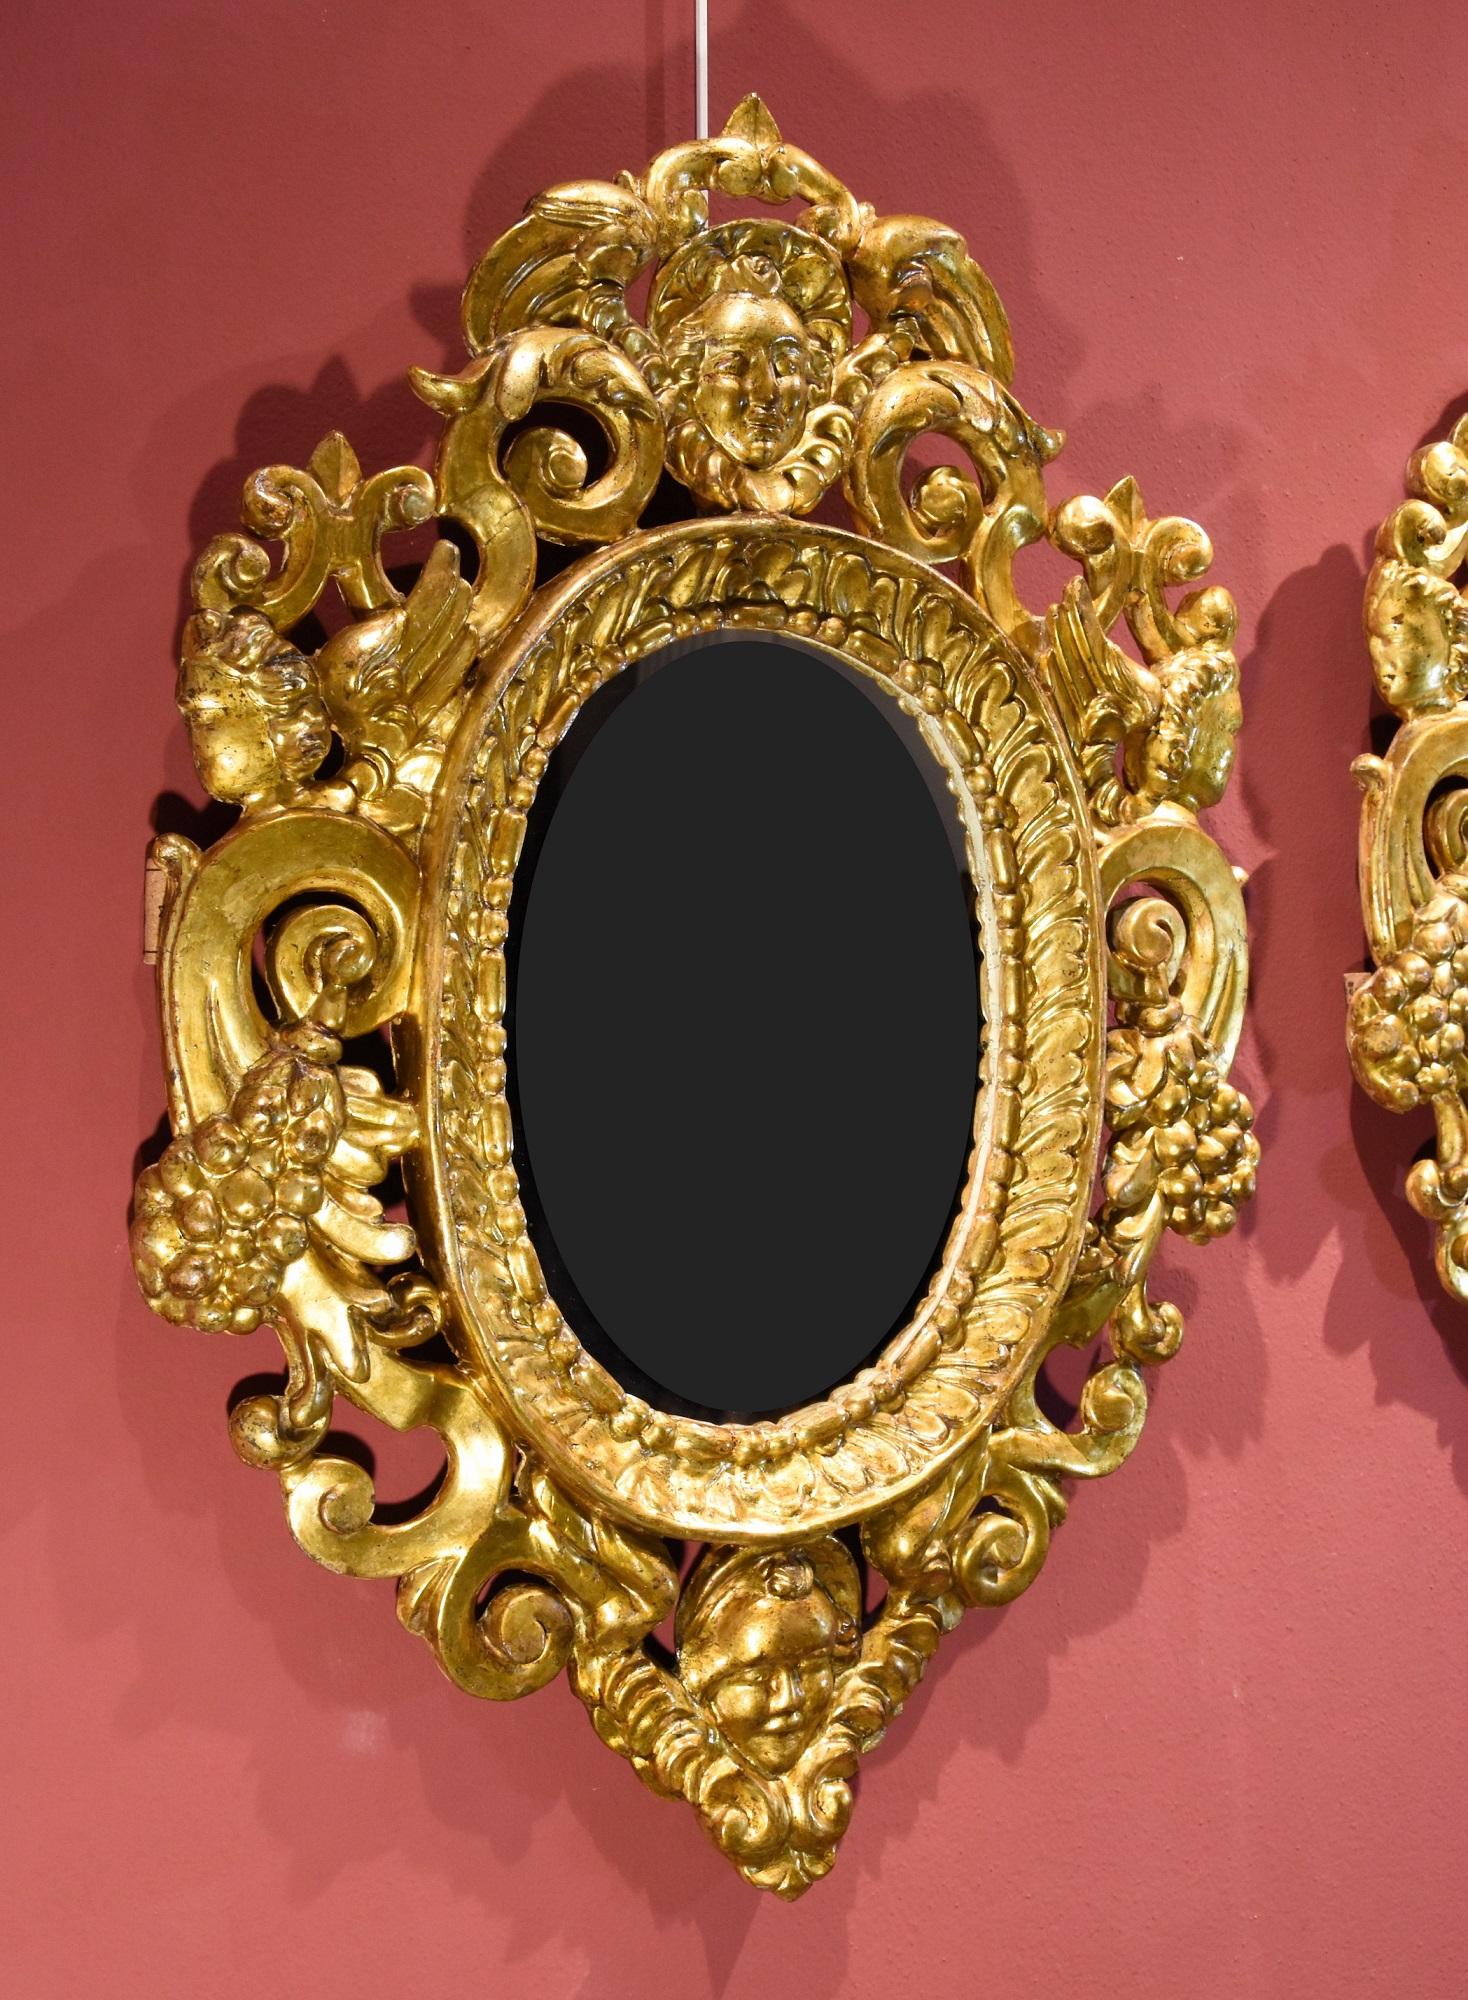 Pair Carved Gilded Mirrors Gold Wood Venice 18th Century Italy Quality Baroque For Sale 9